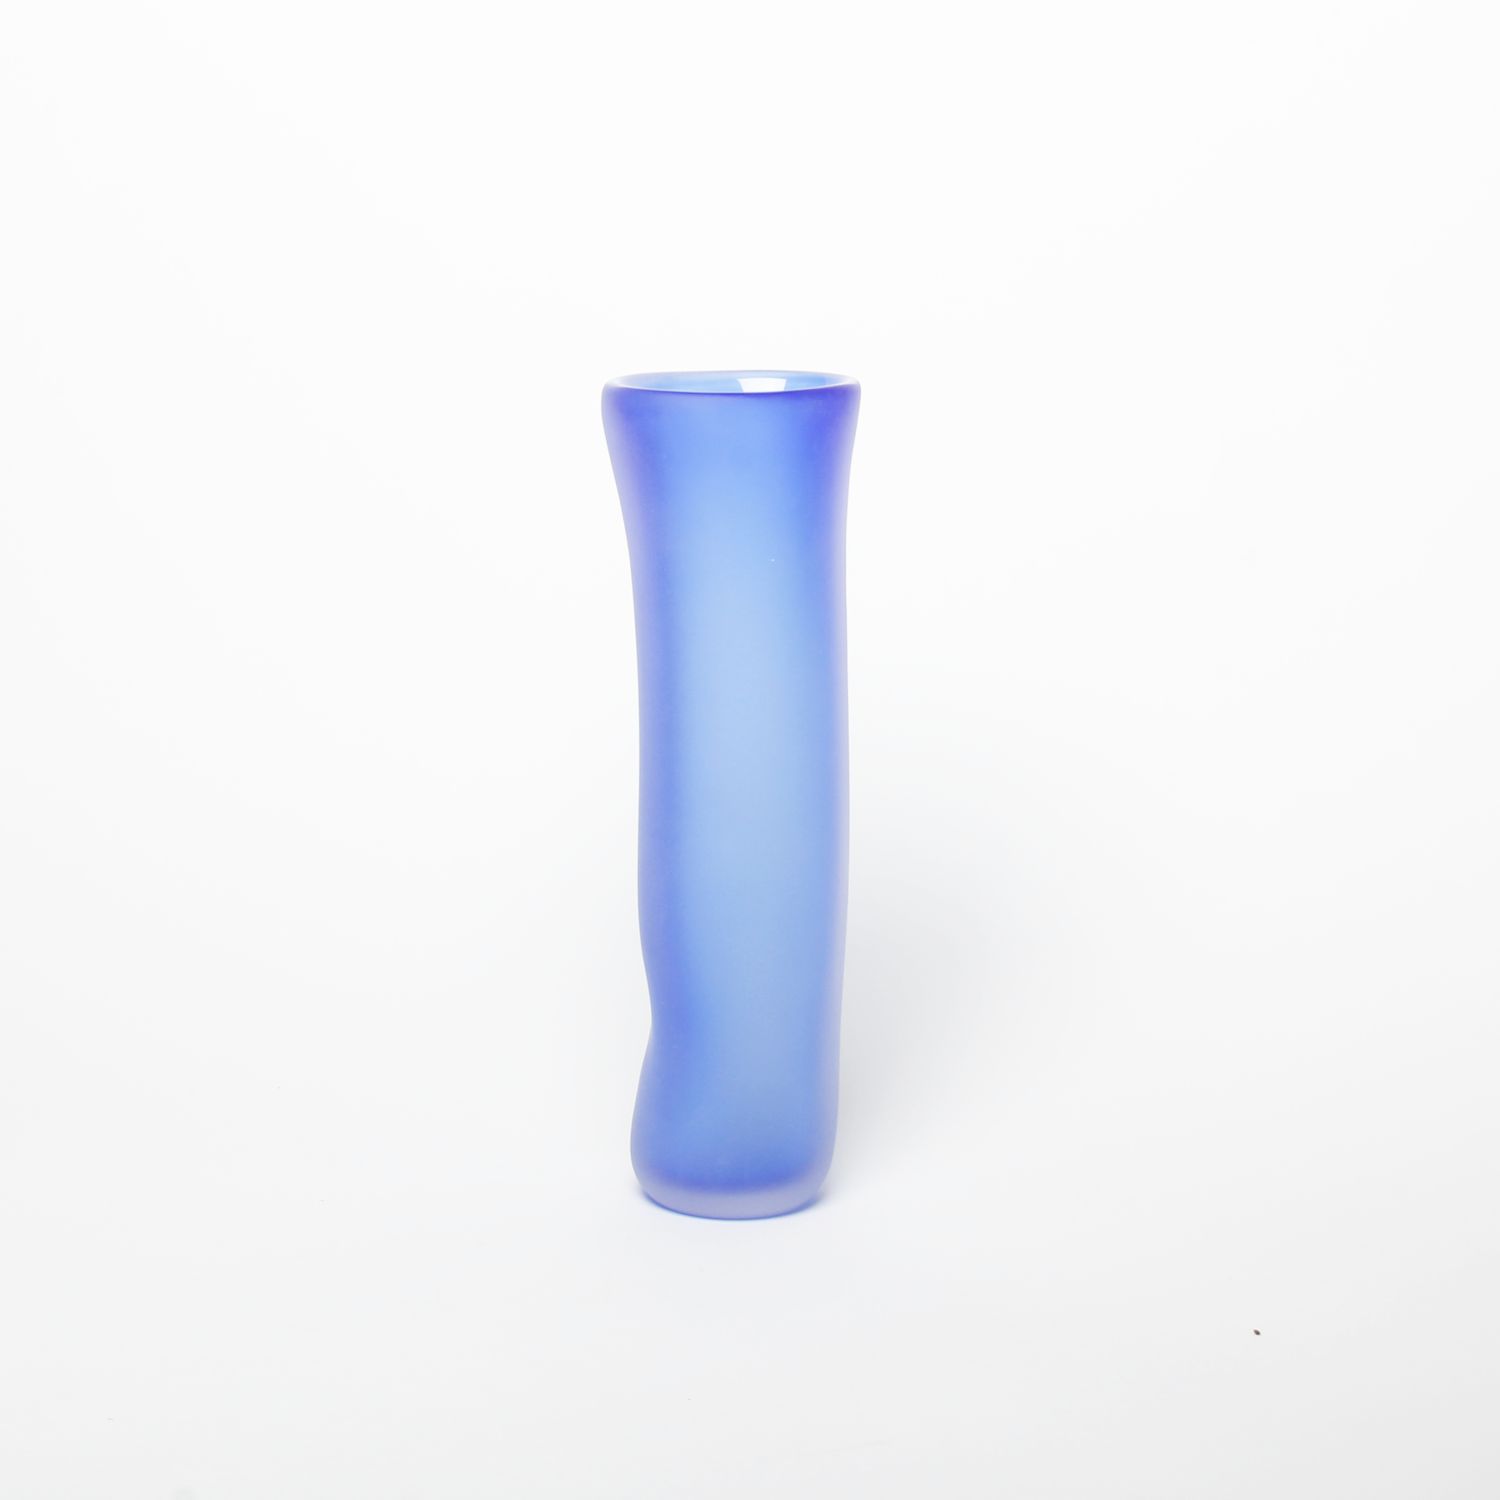 Jill Allan: Large Fat Lipped Vase (Assorted colours) Product Image 6 of 7